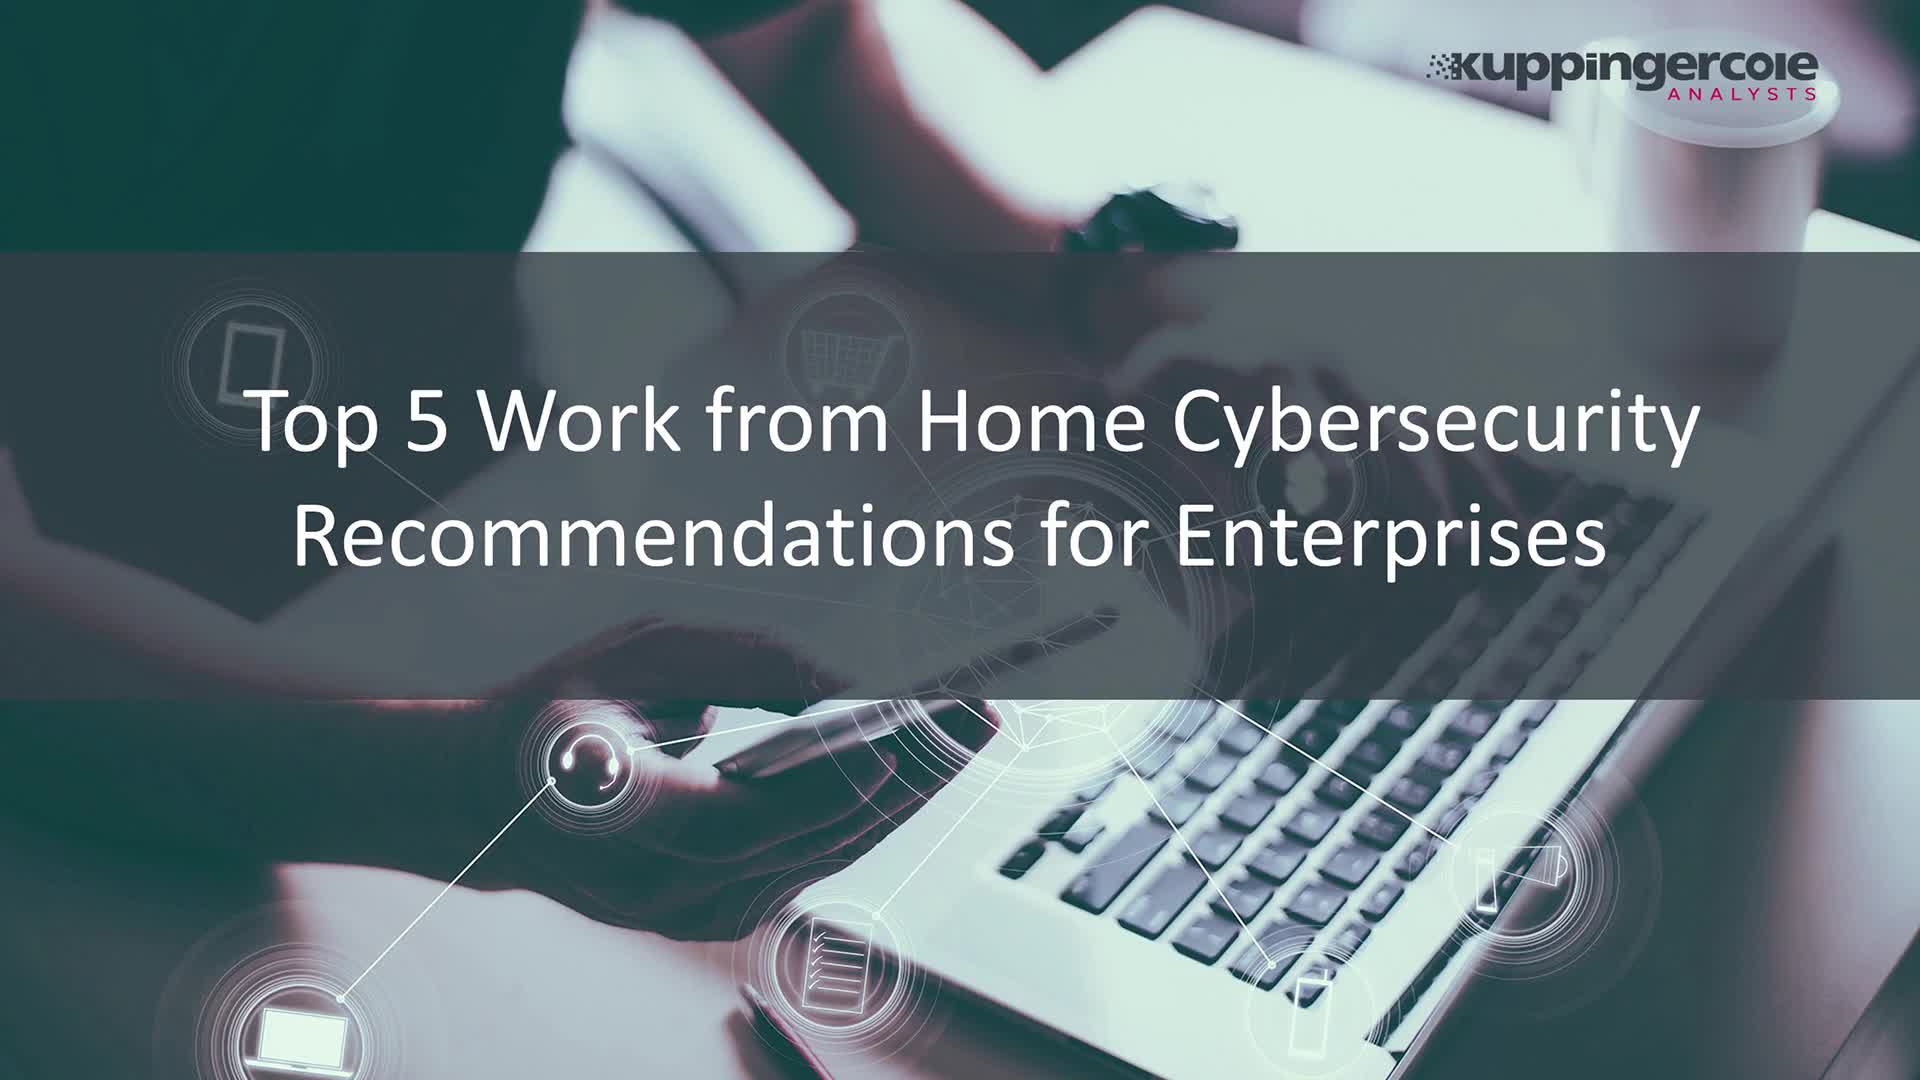 Top 5 Work from Home Cybersecurity Recommendations for Enterprises